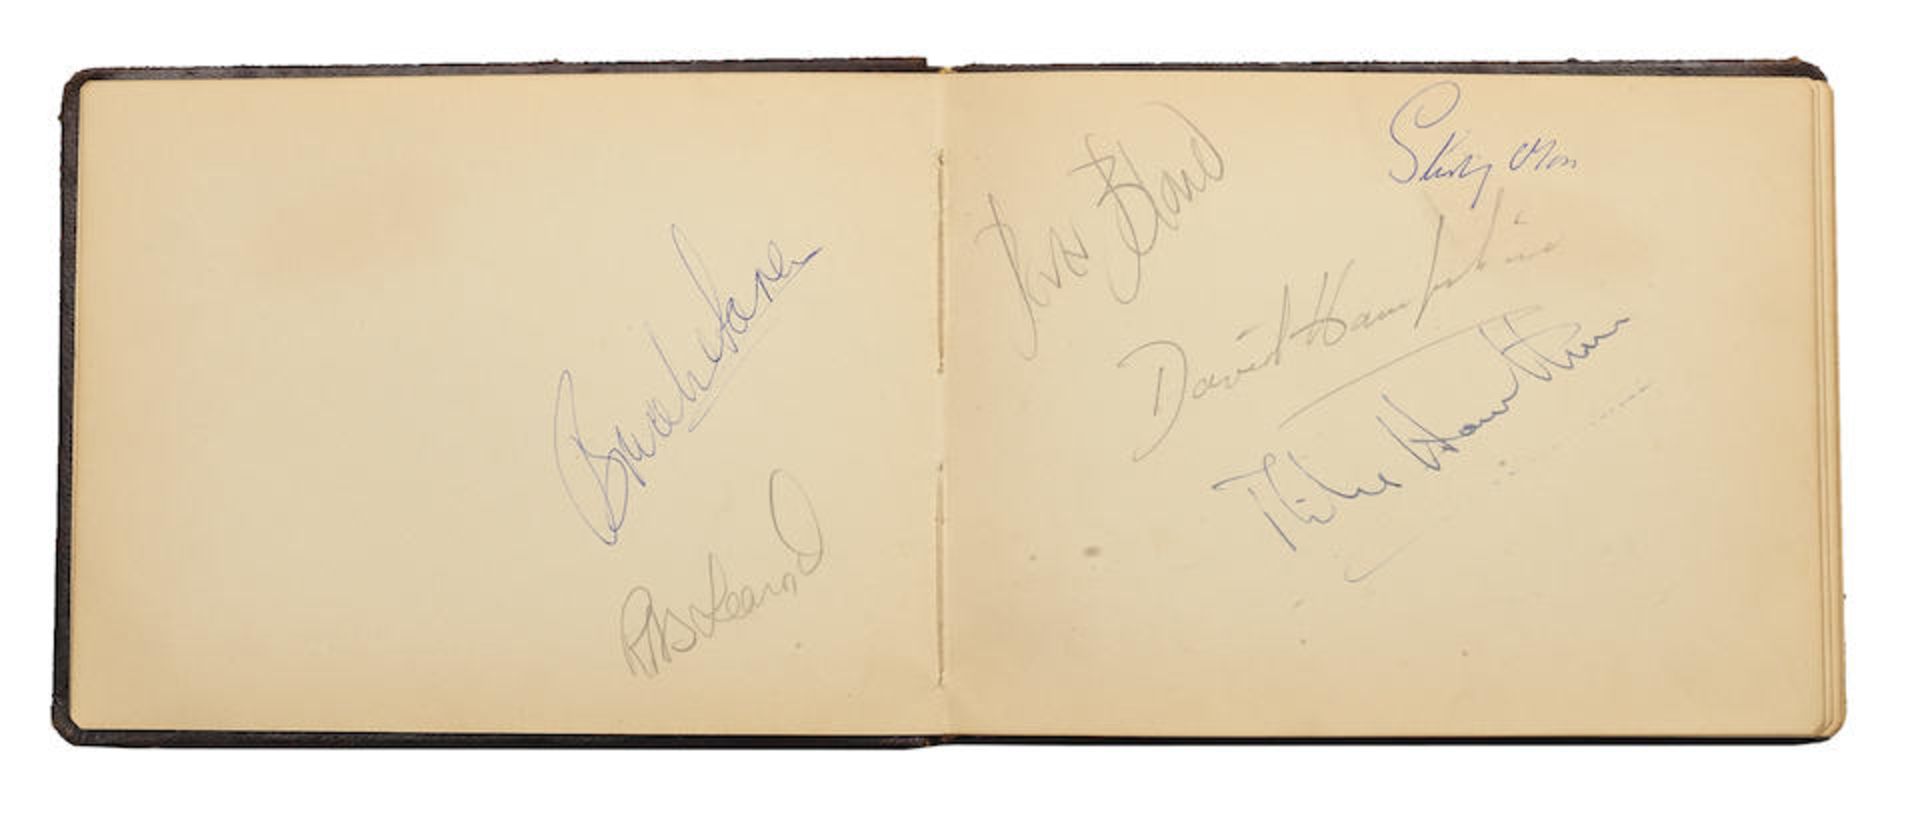 An autograph book comprising many signatures including Mike Hawthorn and Picasso, ((2))